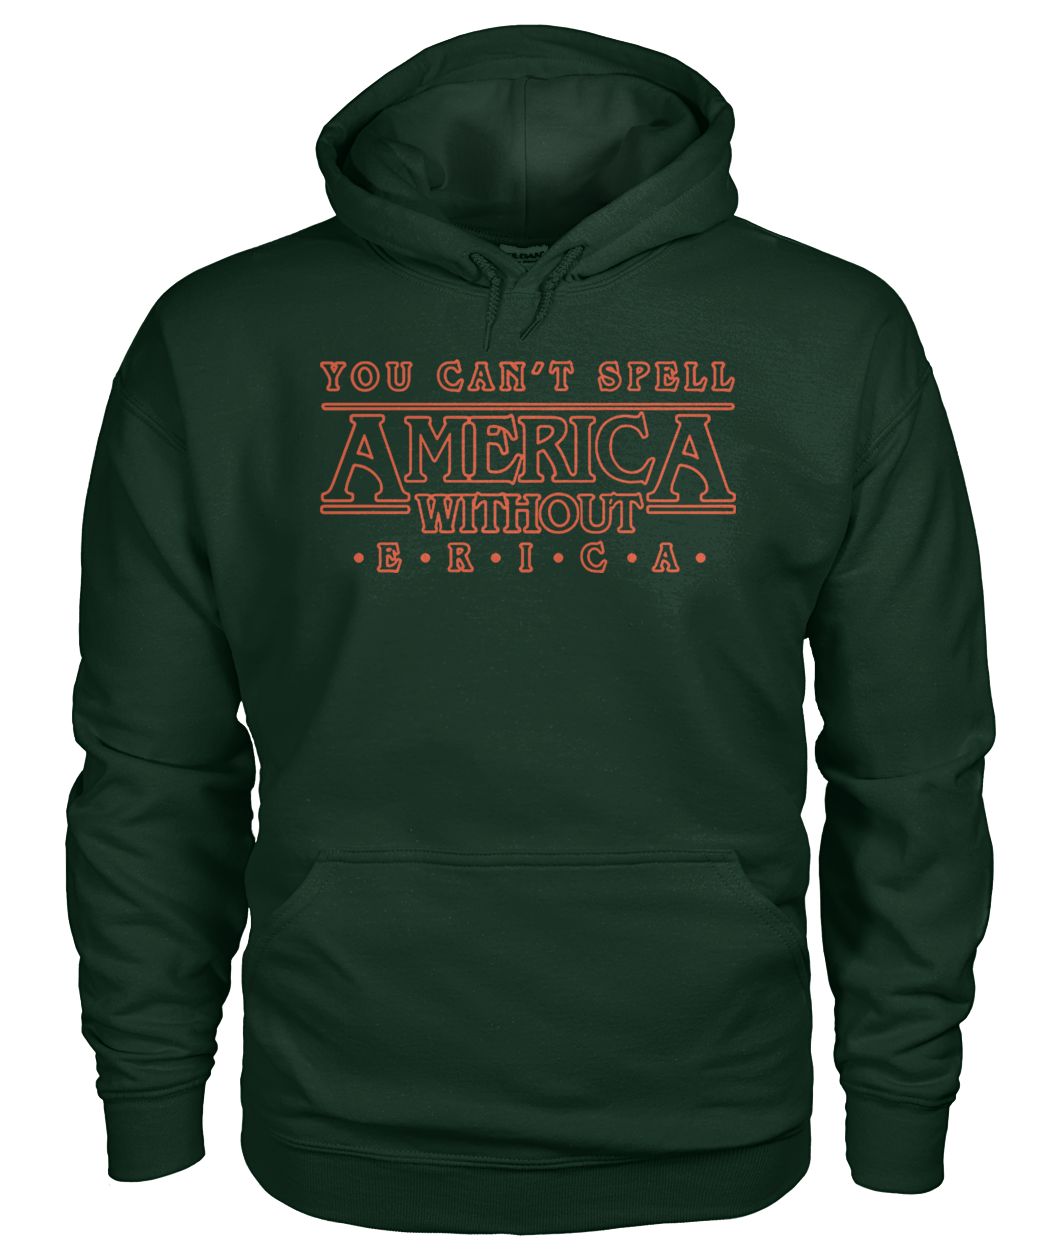 You can't spell america without erica gildan hoodie